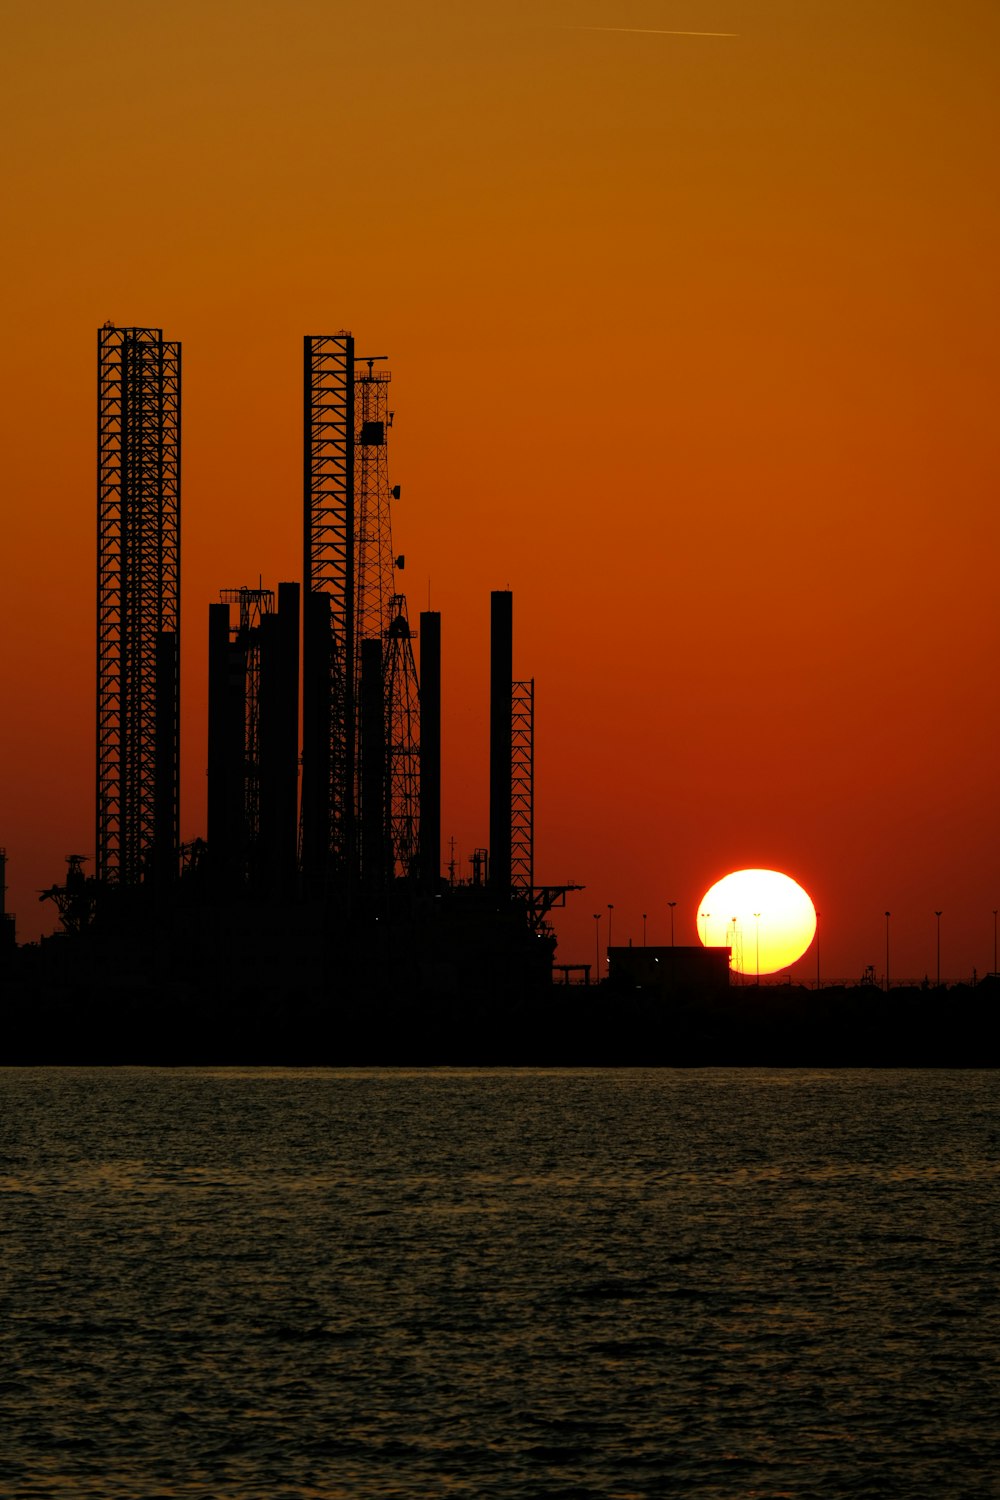 the sun is setting over a large oil refinery